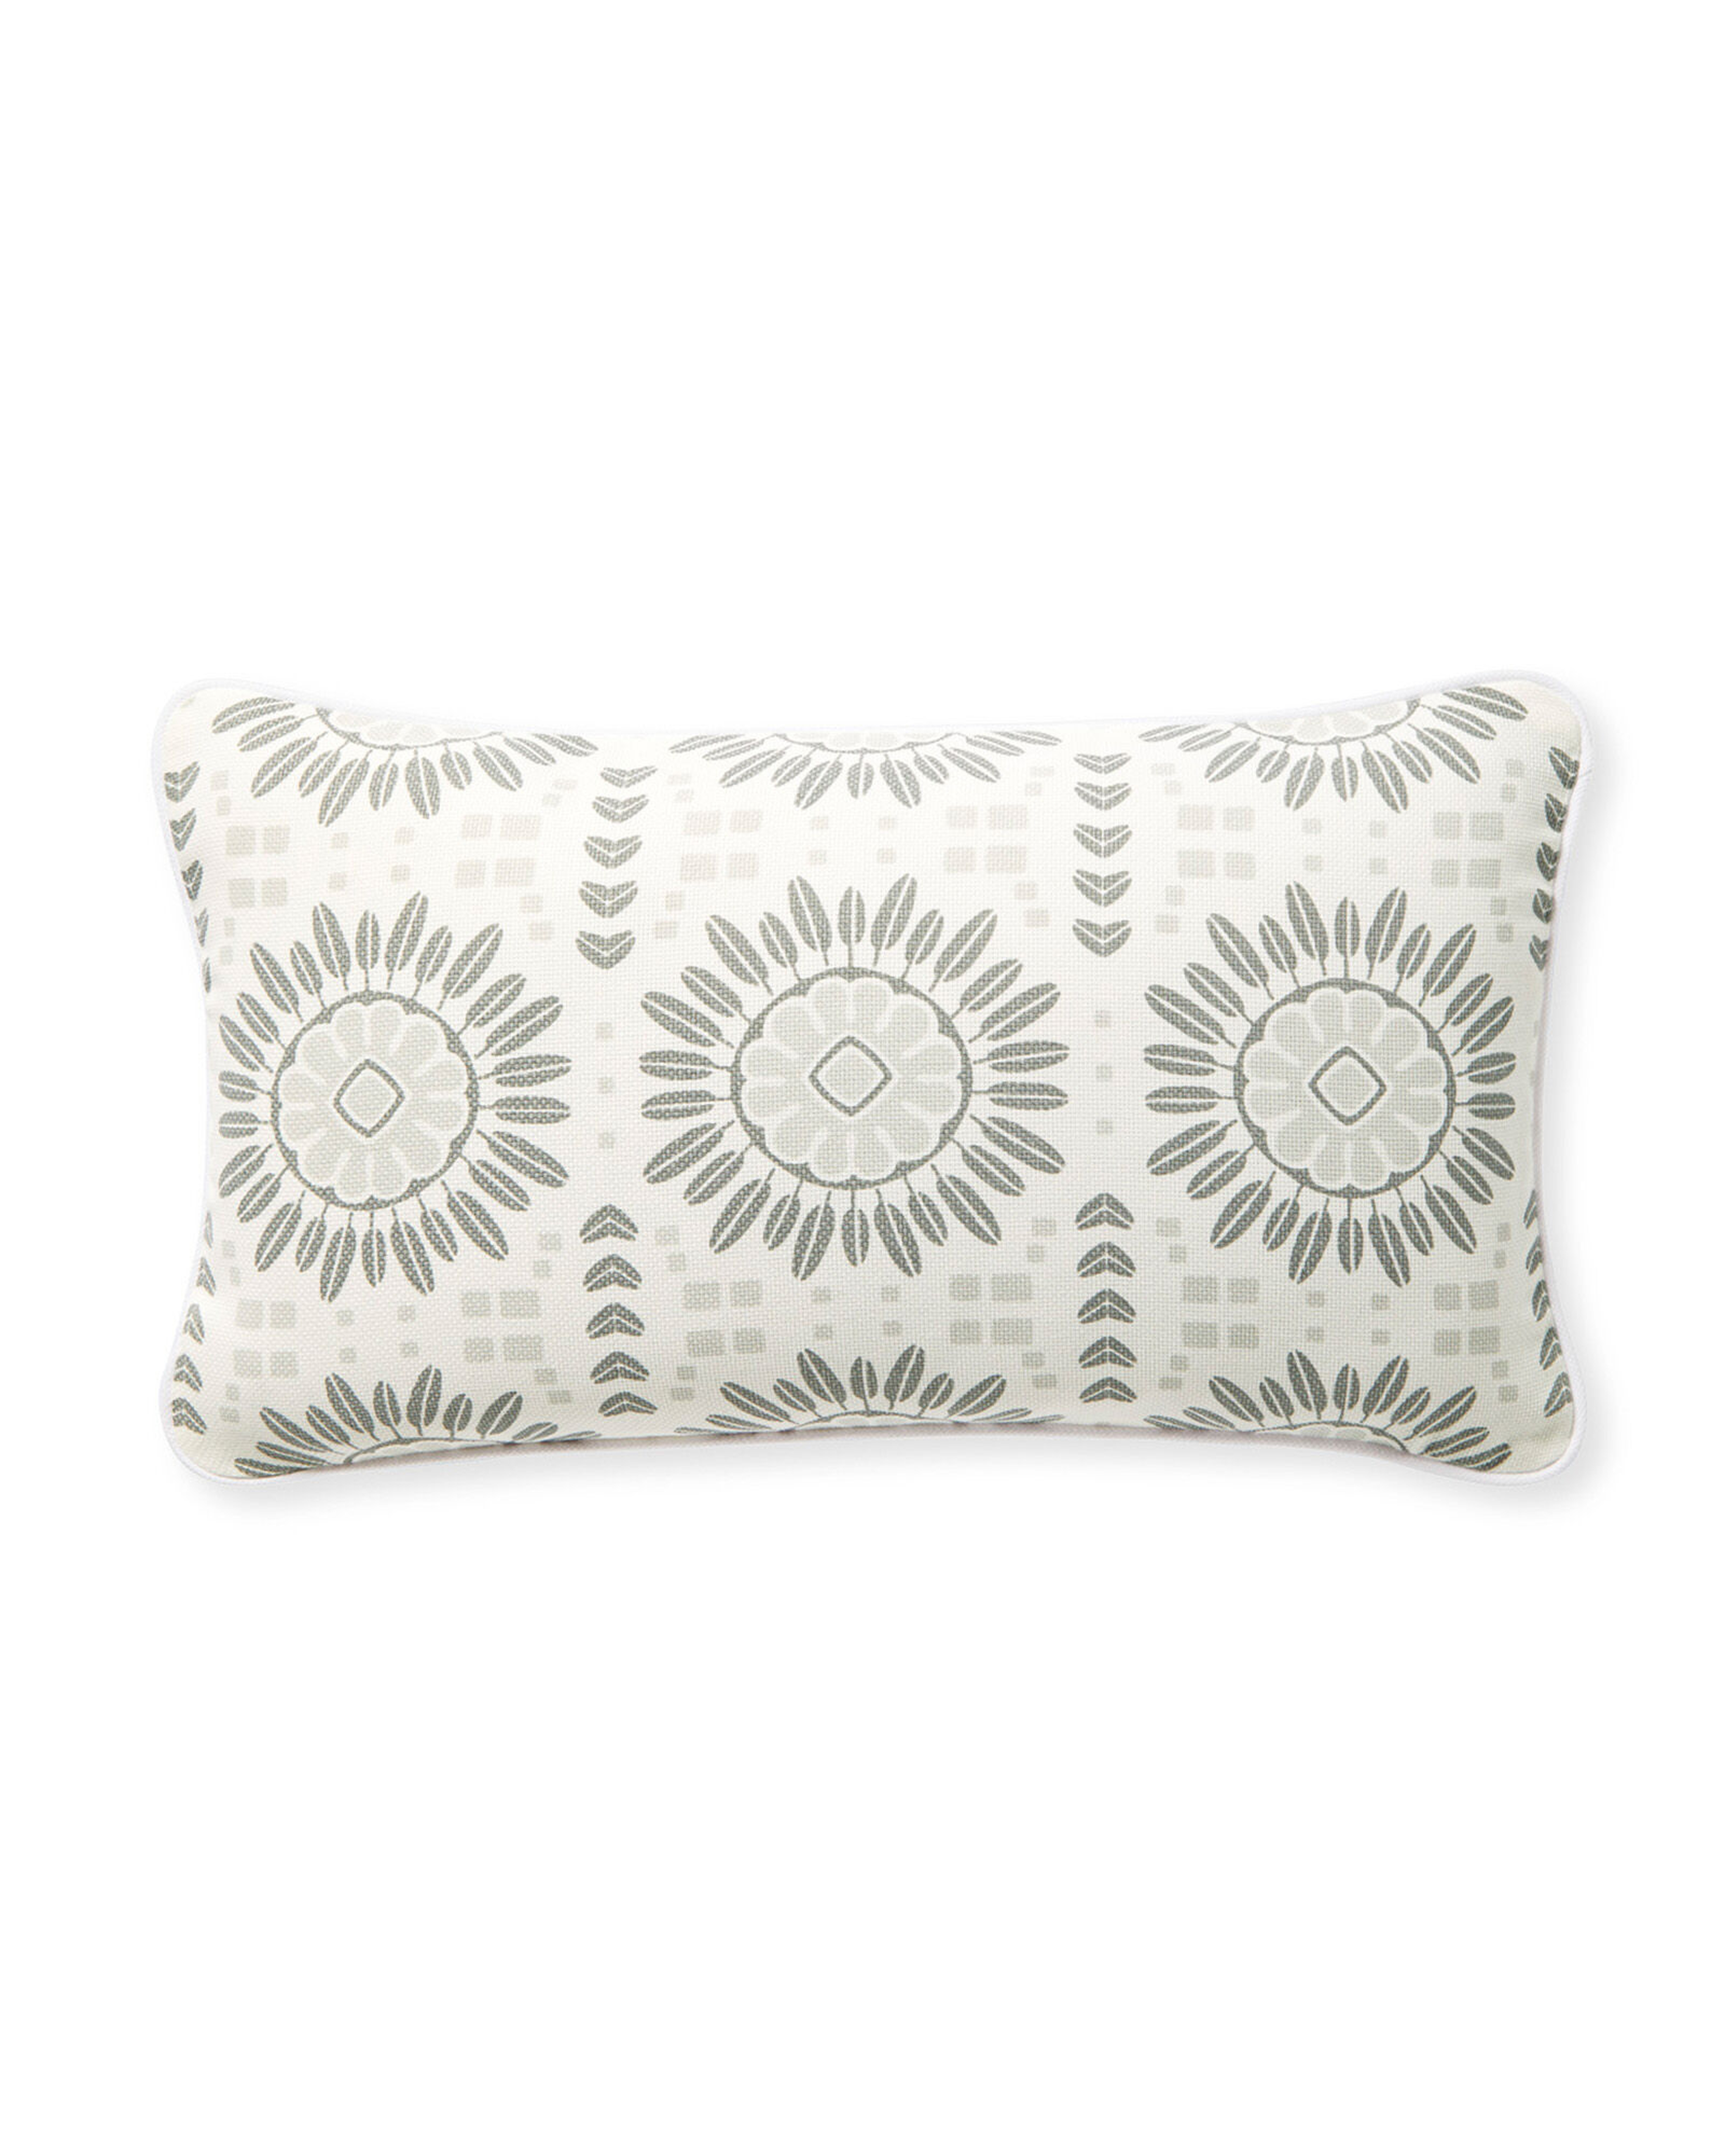 Campania Pillow Cover - Serena and Lily